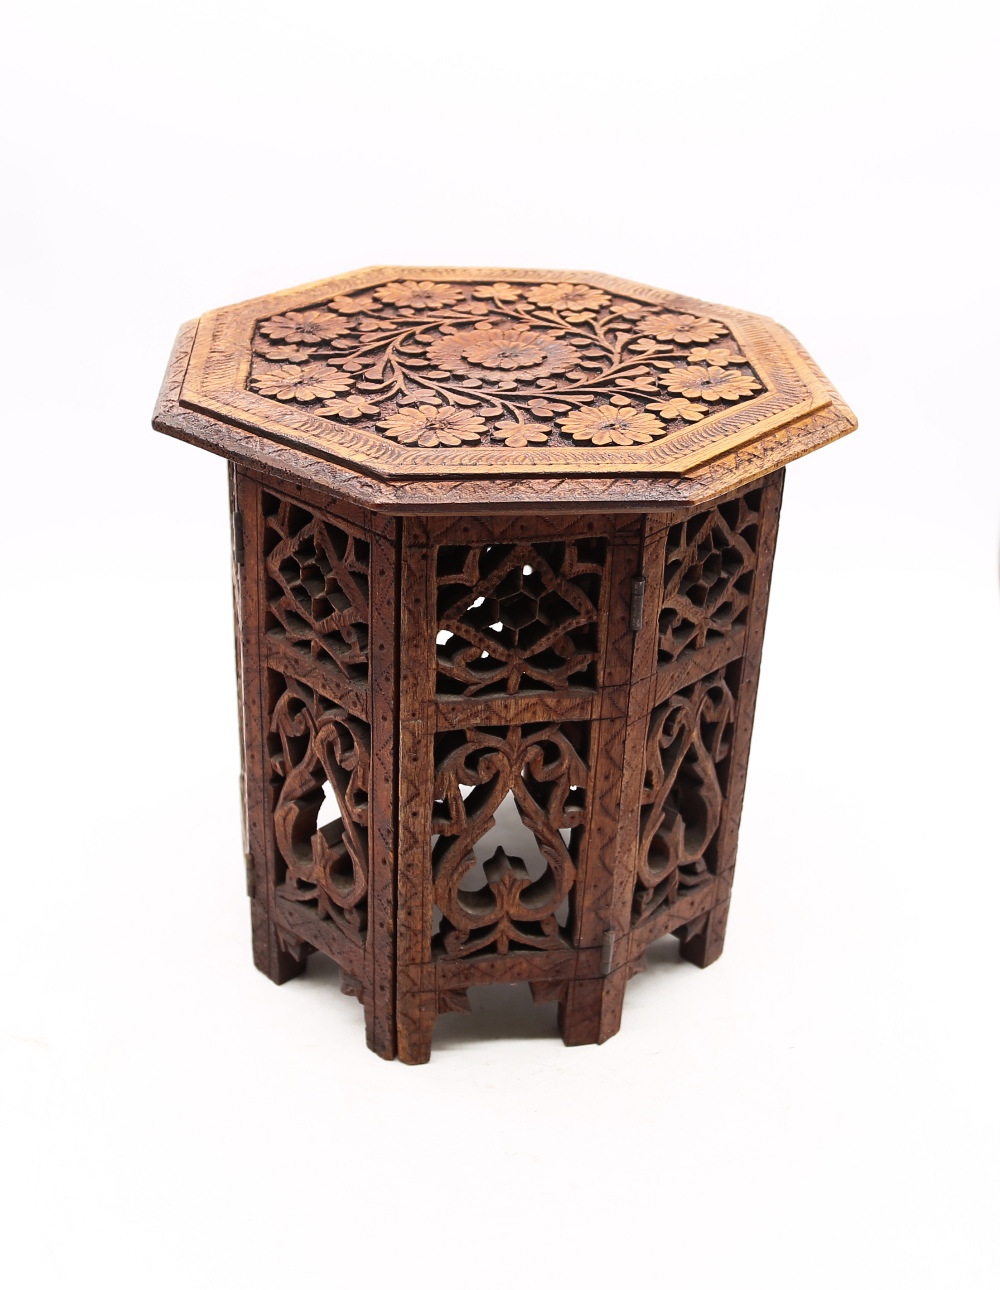 A Indian carved miniature table/stand in hardwood.